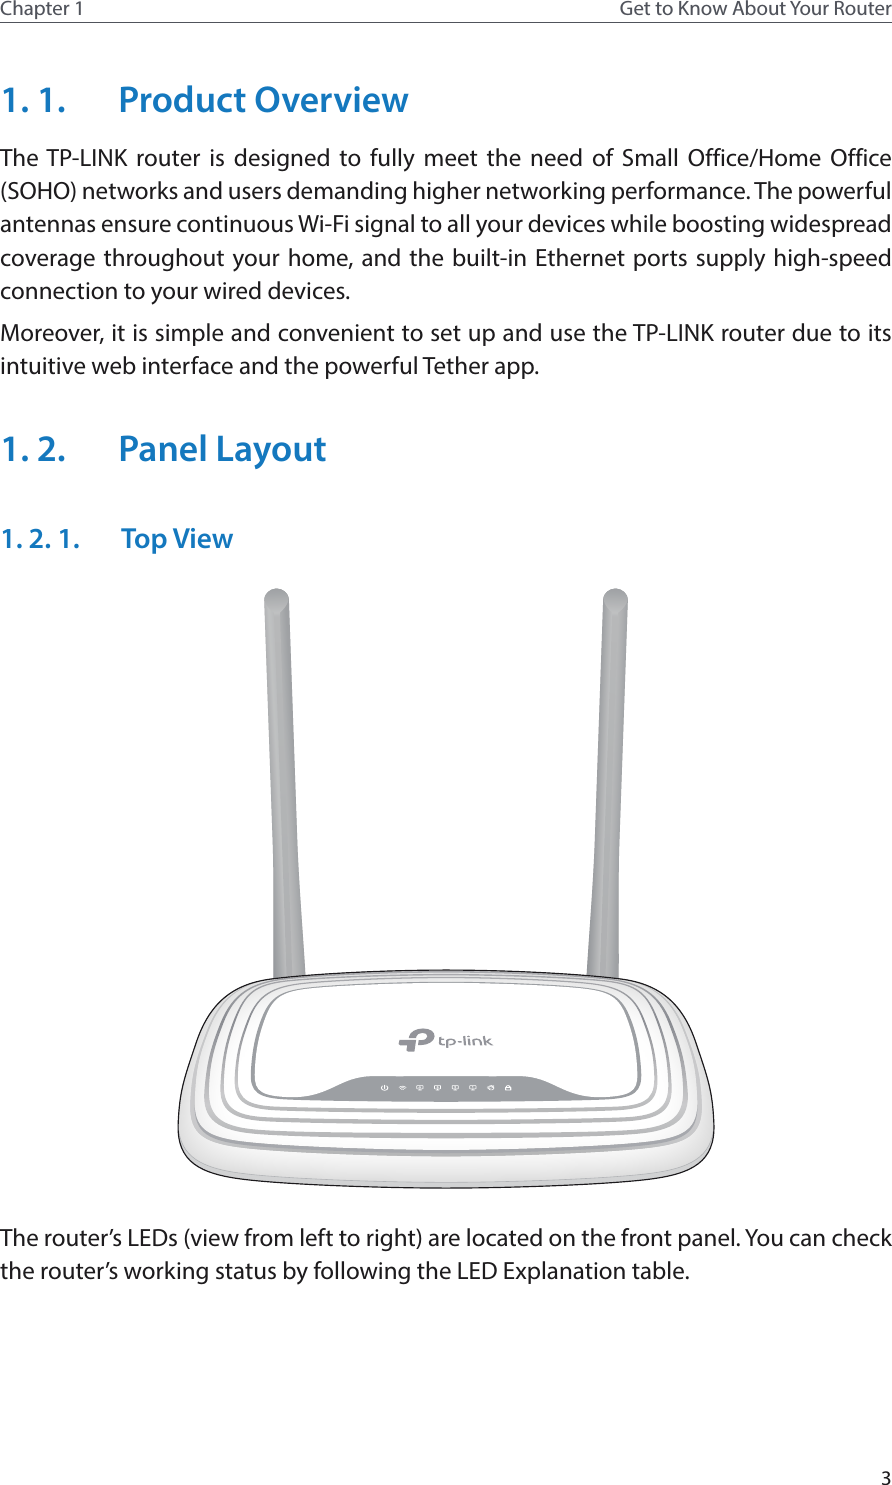 3Chapter 1 Get to Know About Your Router1. 1.  Product OverviewThe TP-LINK router is designed to fully meet the need of Small Office/Home Office (SOHO) networks and users demanding higher networking performance. The powerful antennas ensure continuous Wi-Fi signal to all your devices while boosting widespread coverage throughout your home, and the built-in Ethernet ports supply high-speed connection to your wired devices.Moreover, it is simple and convenient to set up and use the TP-LINK router due to its intuitive web interface and the powerful Tether app.1. 2.  Panel Layout1. 2. 1.  Top ViewThe router’s LEDs (view from left to right) are located on the front panel. You can check the router’s working status by following the LED Explanation table.